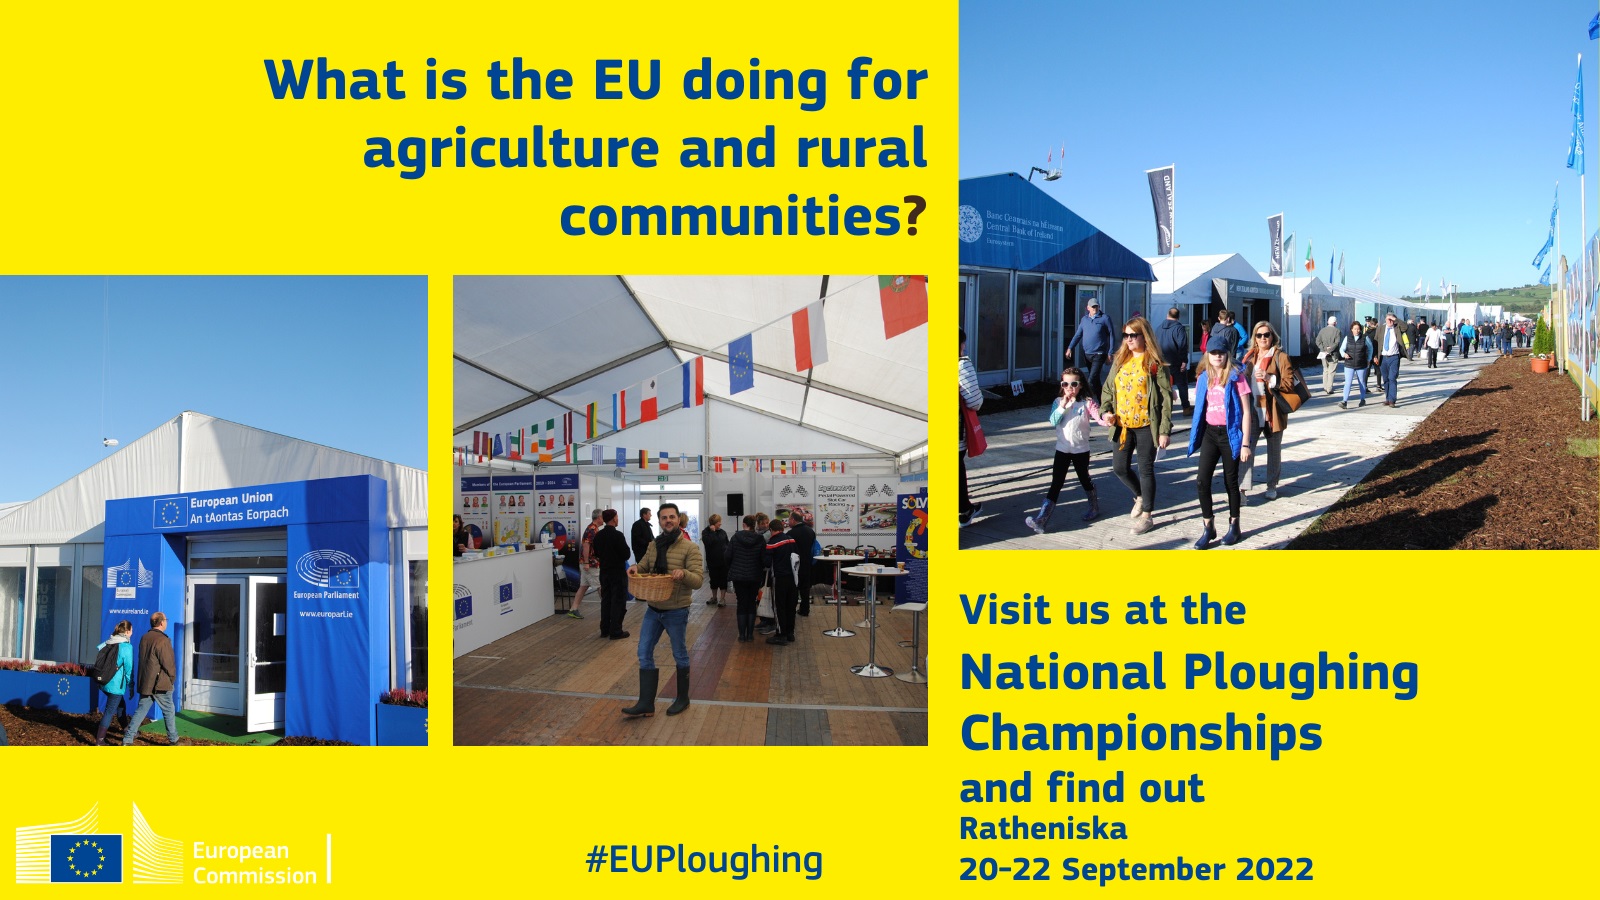 Image promoting the EU marquee at the National Ploughing Championships 2022